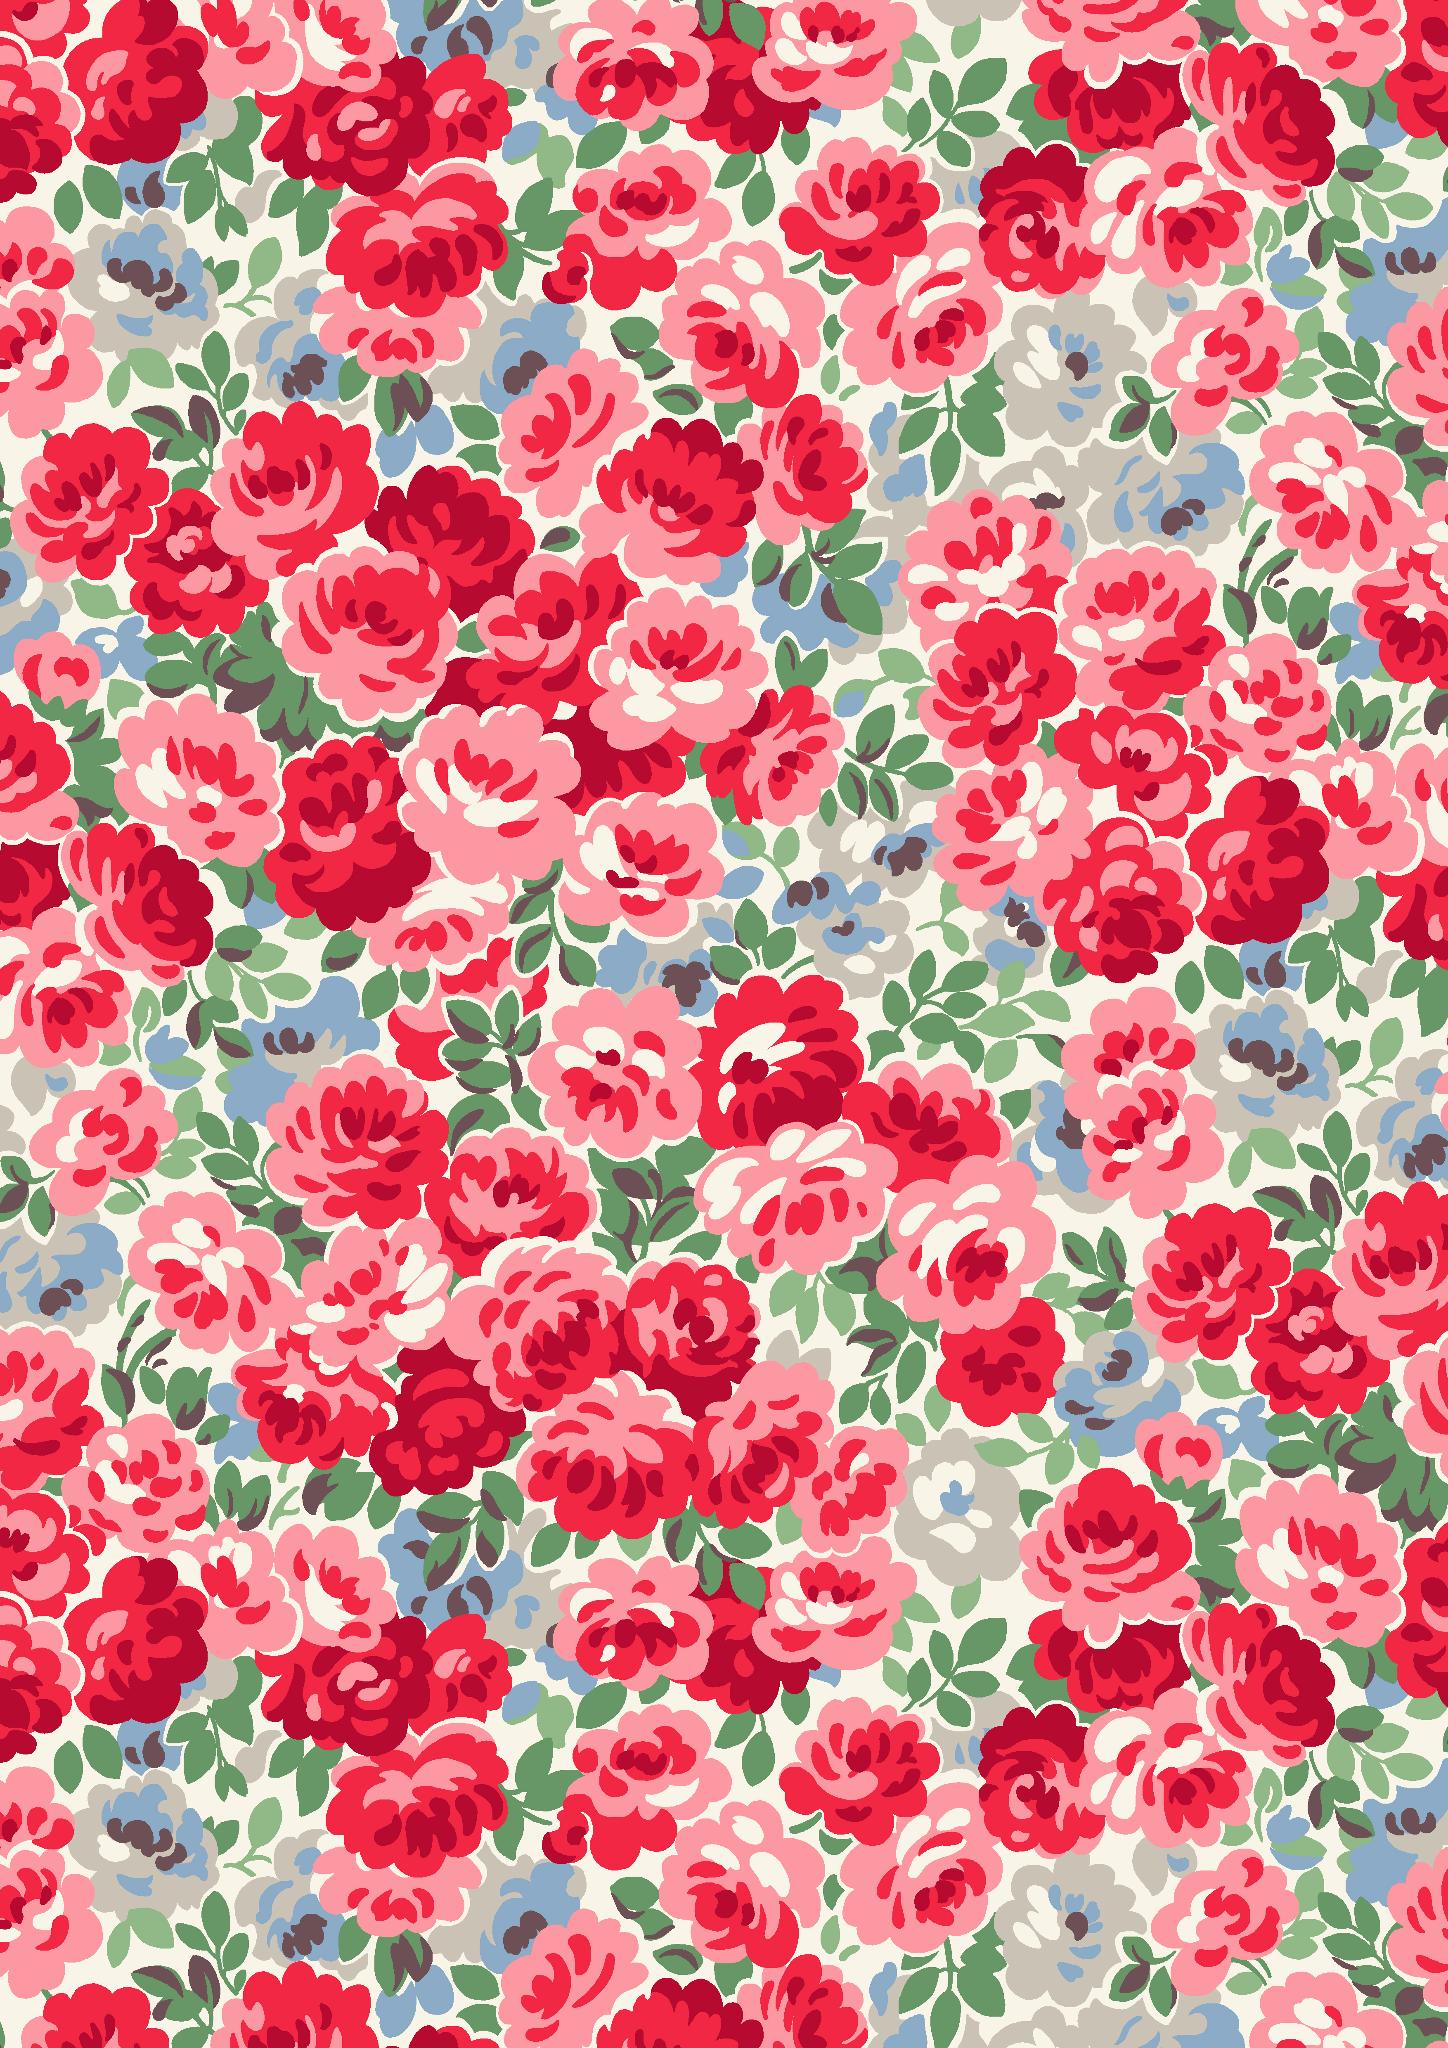 Bewmore Rose A Festive Floral Brimming With Cheerful - Flower Design For Phone Cover - HD Wallpaper 